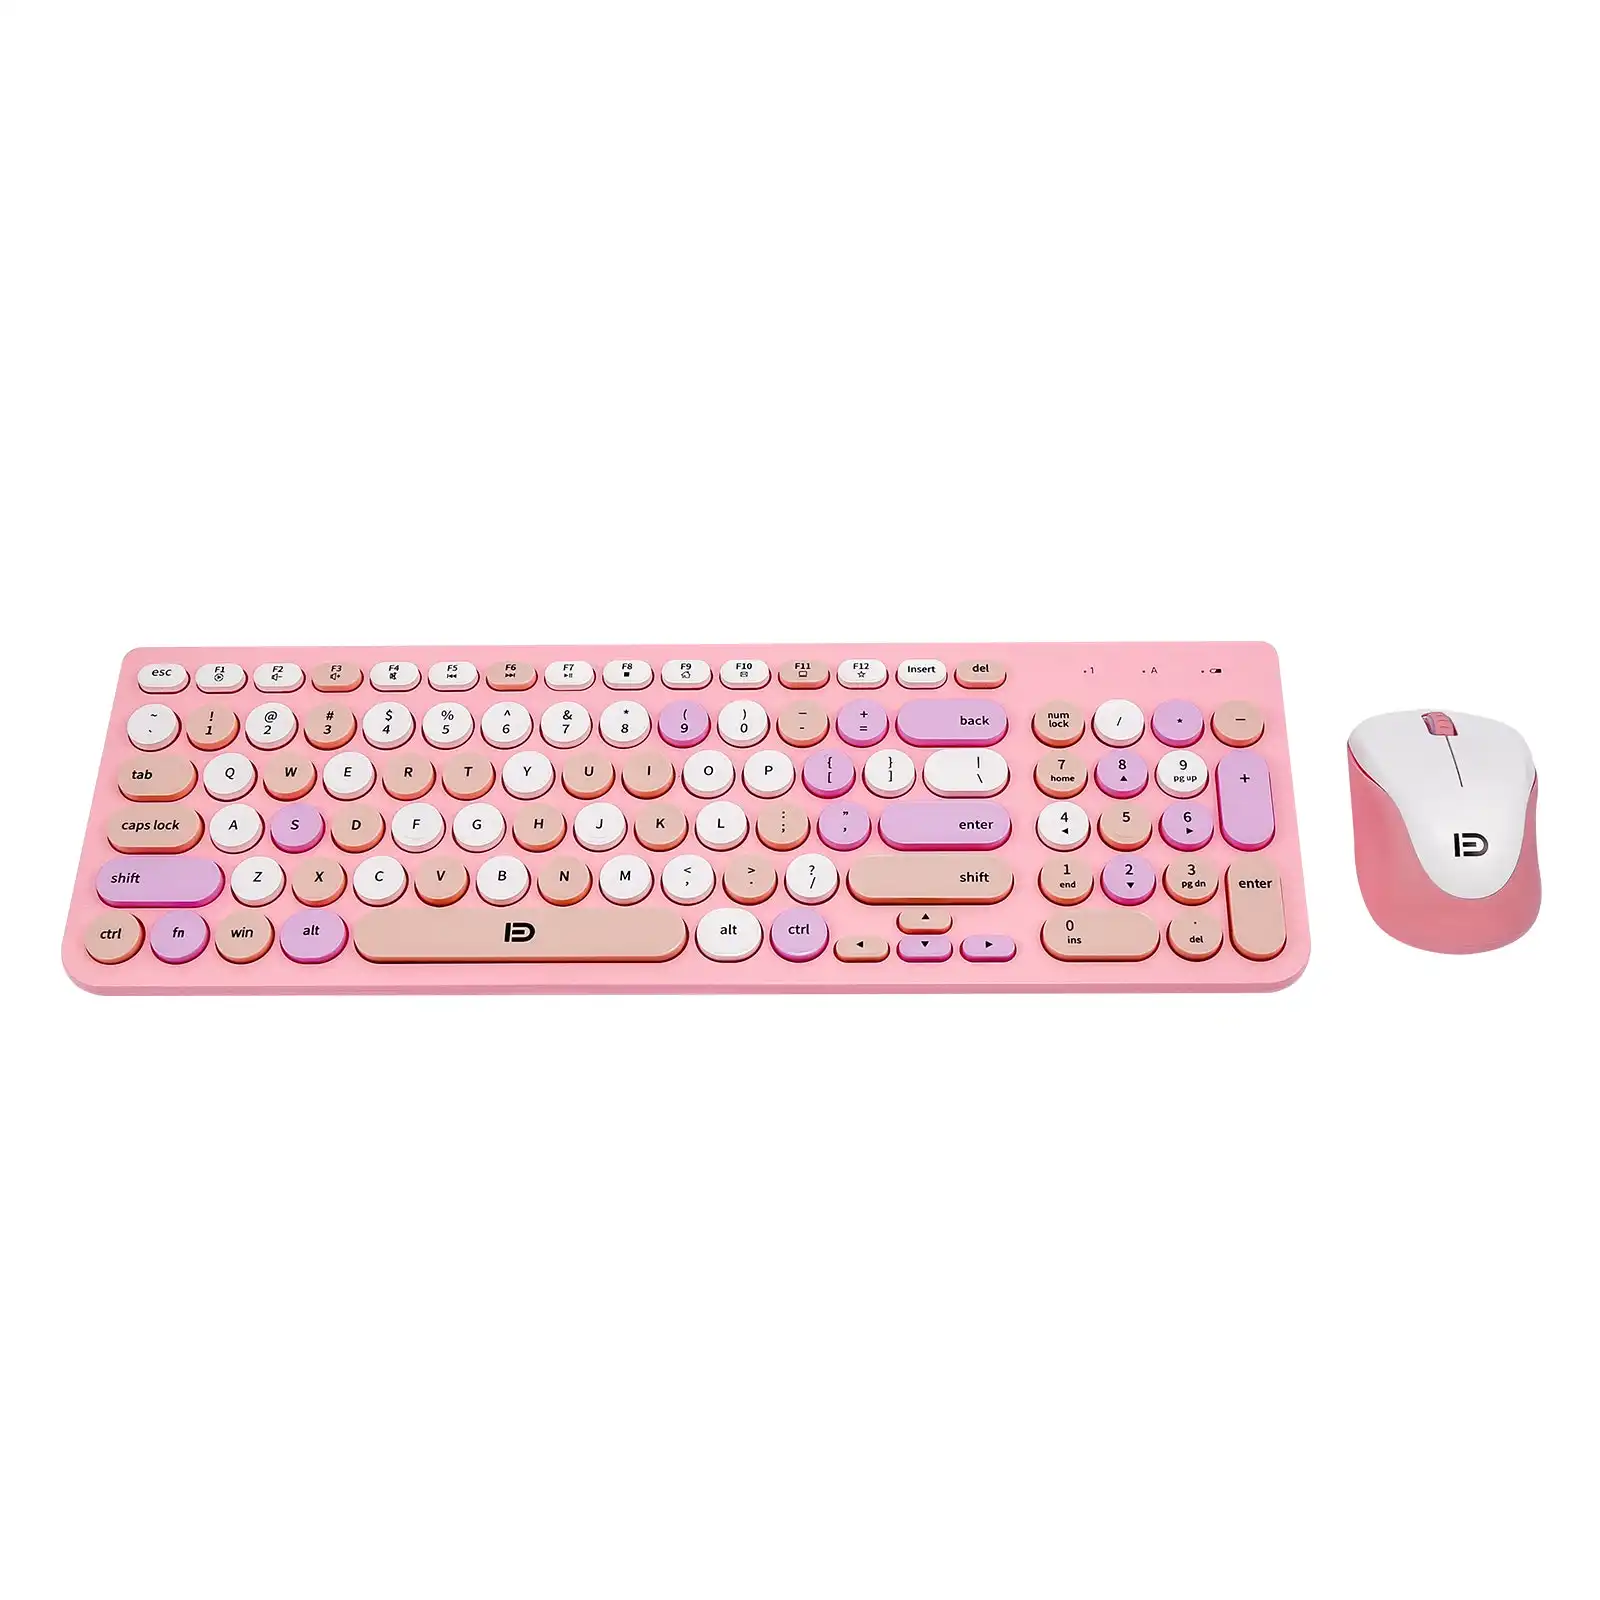 TODO 2.4Ghz Wireless Keyboard Mouse Combo Rechargeable Mac Windows Android 96 Key - Pink